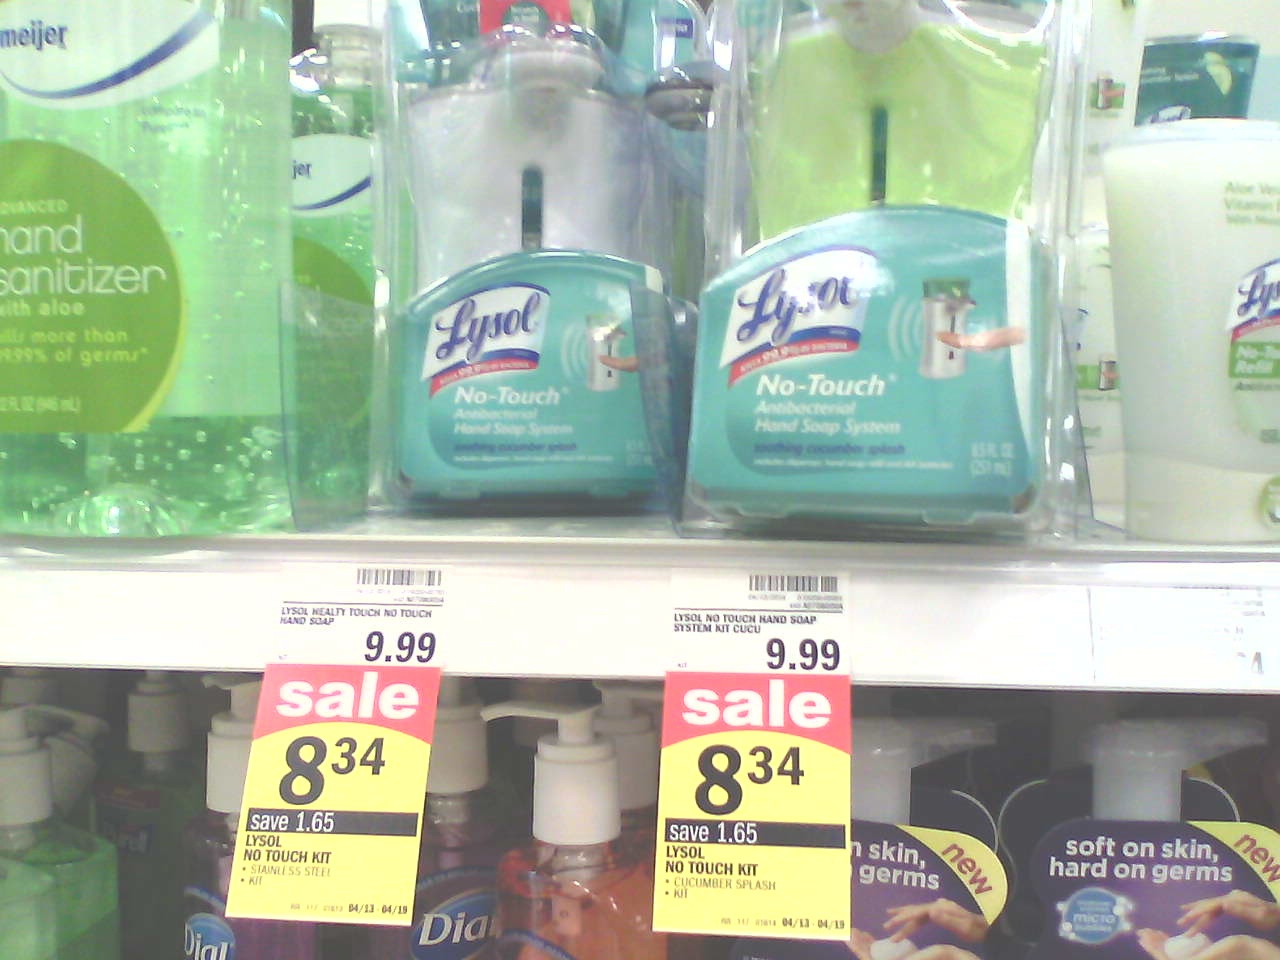 Meijer Coupons From Free Tastes Good! With Joni Meyer-Crothers - Lysol Hands Free Soap Dispenser Printable Coupon